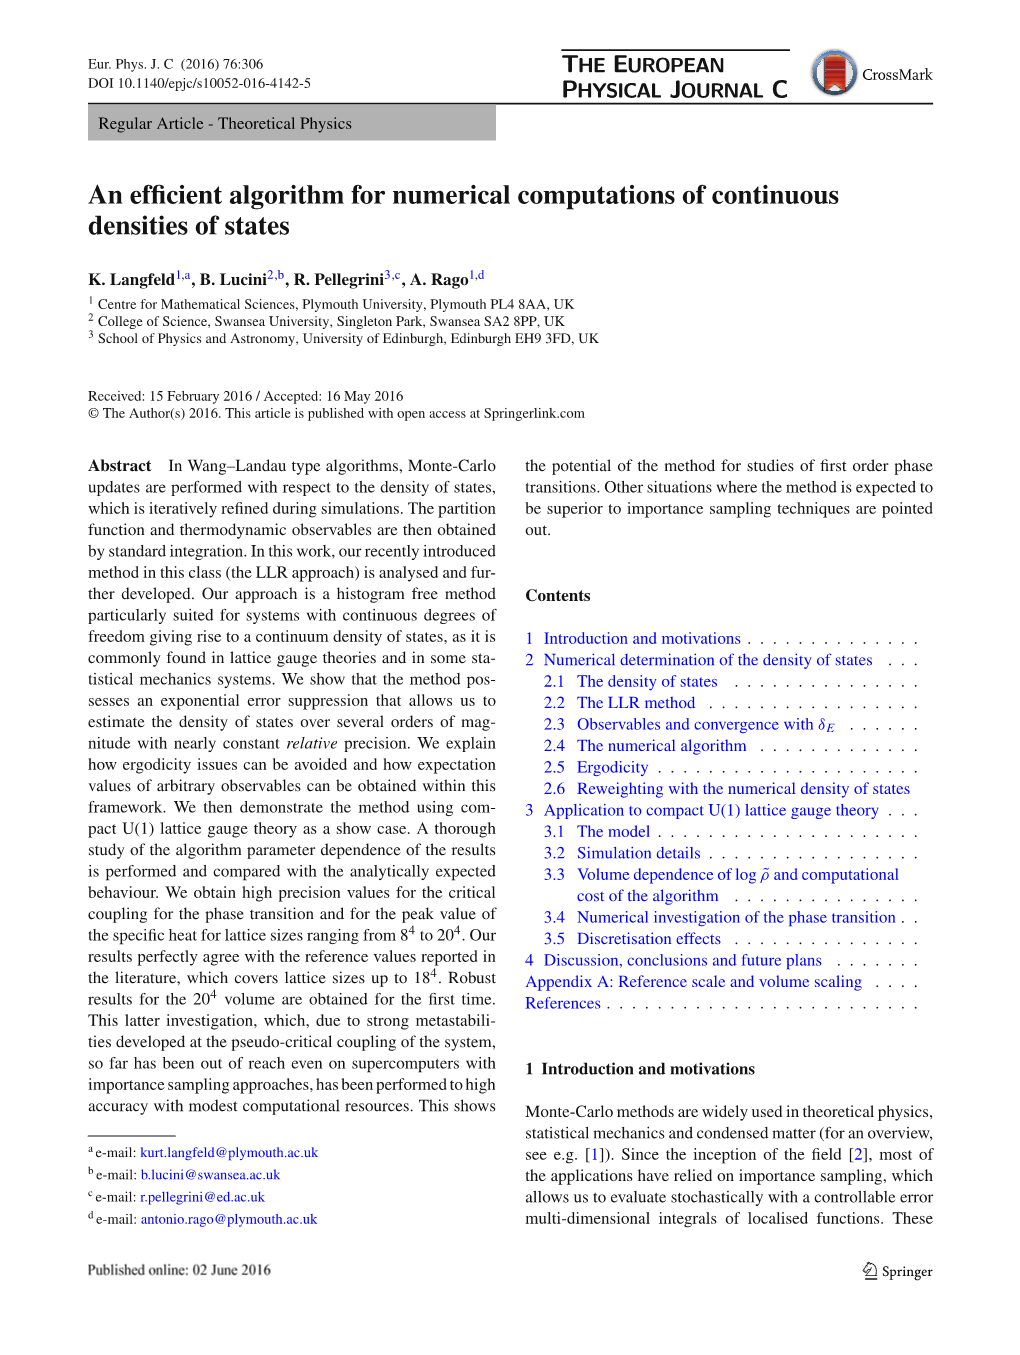 An Efficient Algorithm for Numerical Computations of Continuous Densities of States